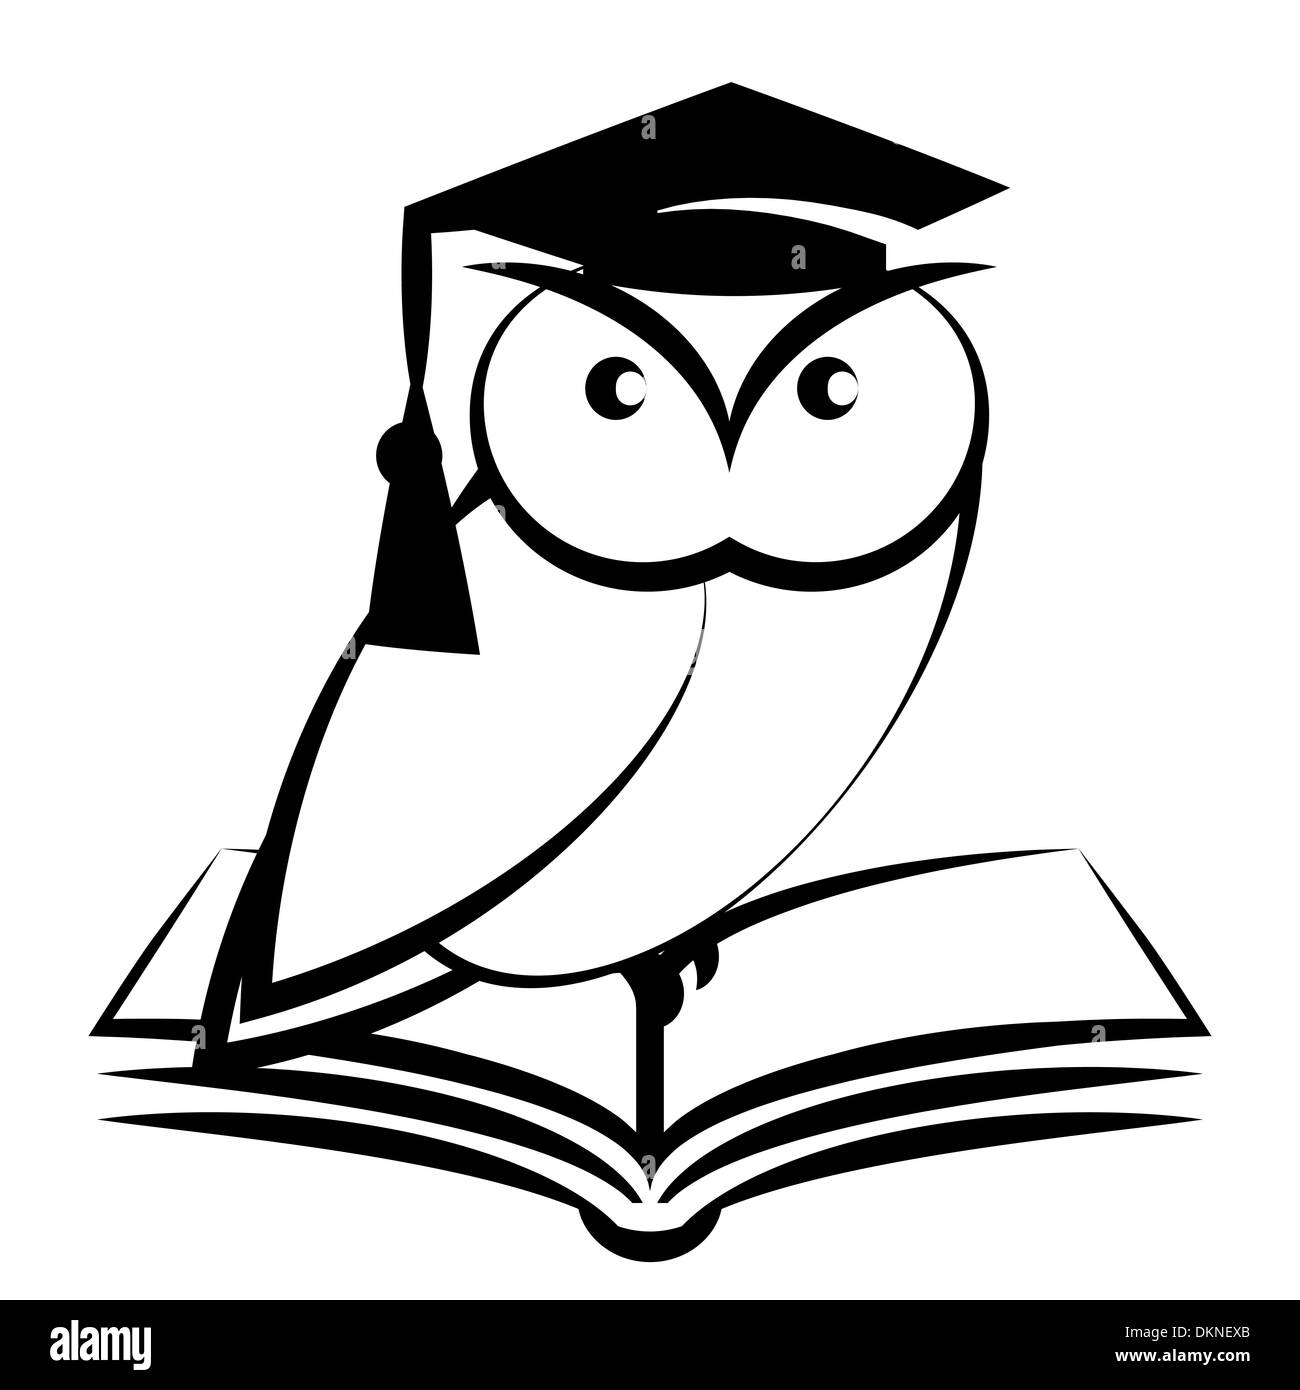 Owl with college hat and book - symbol of wisdom isolated on white background Stock Photo